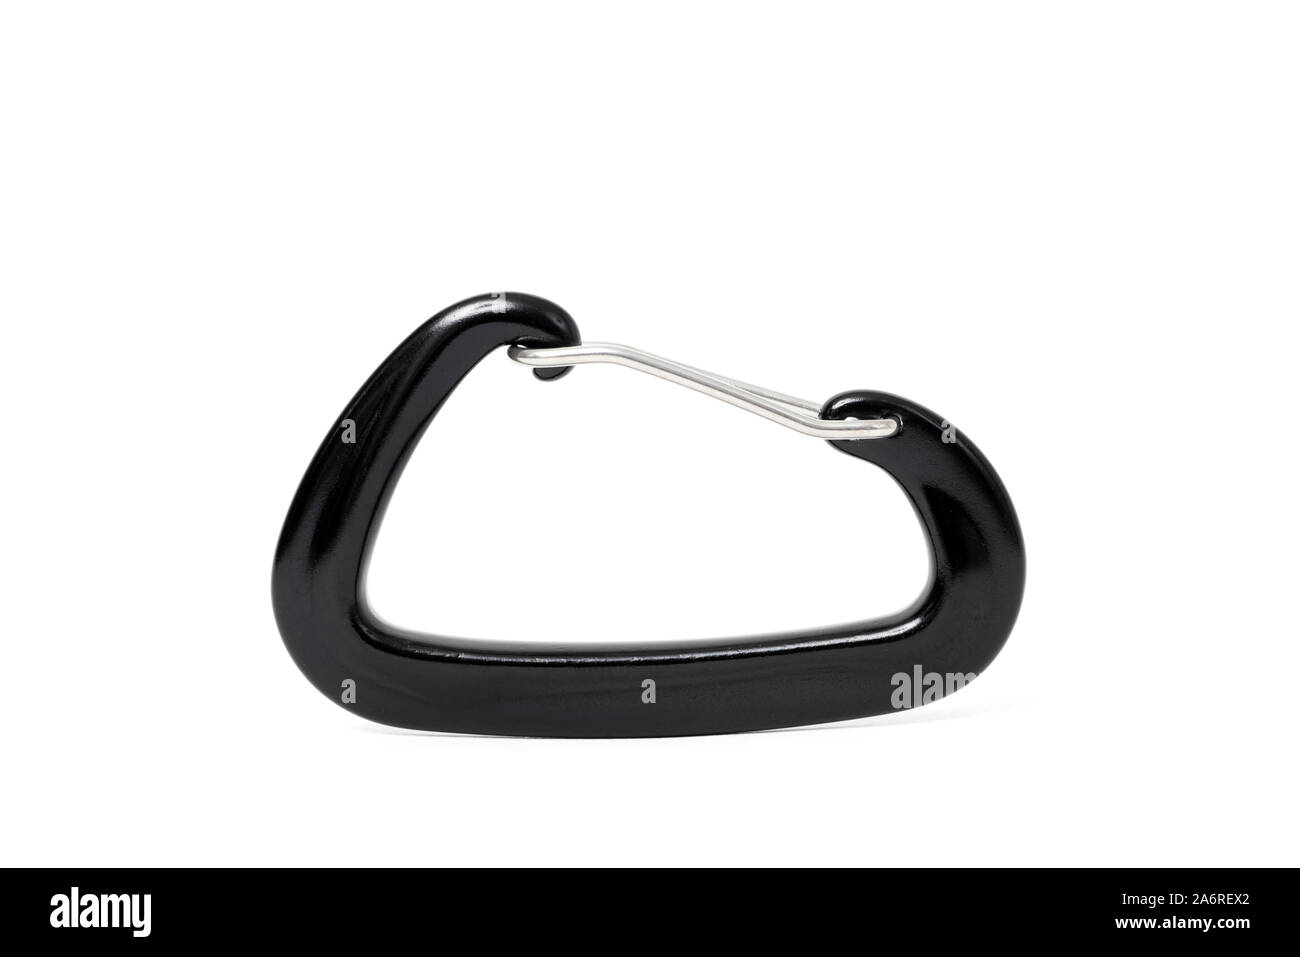 closeup of a black aluminium carabiner on a white background Stock Photo